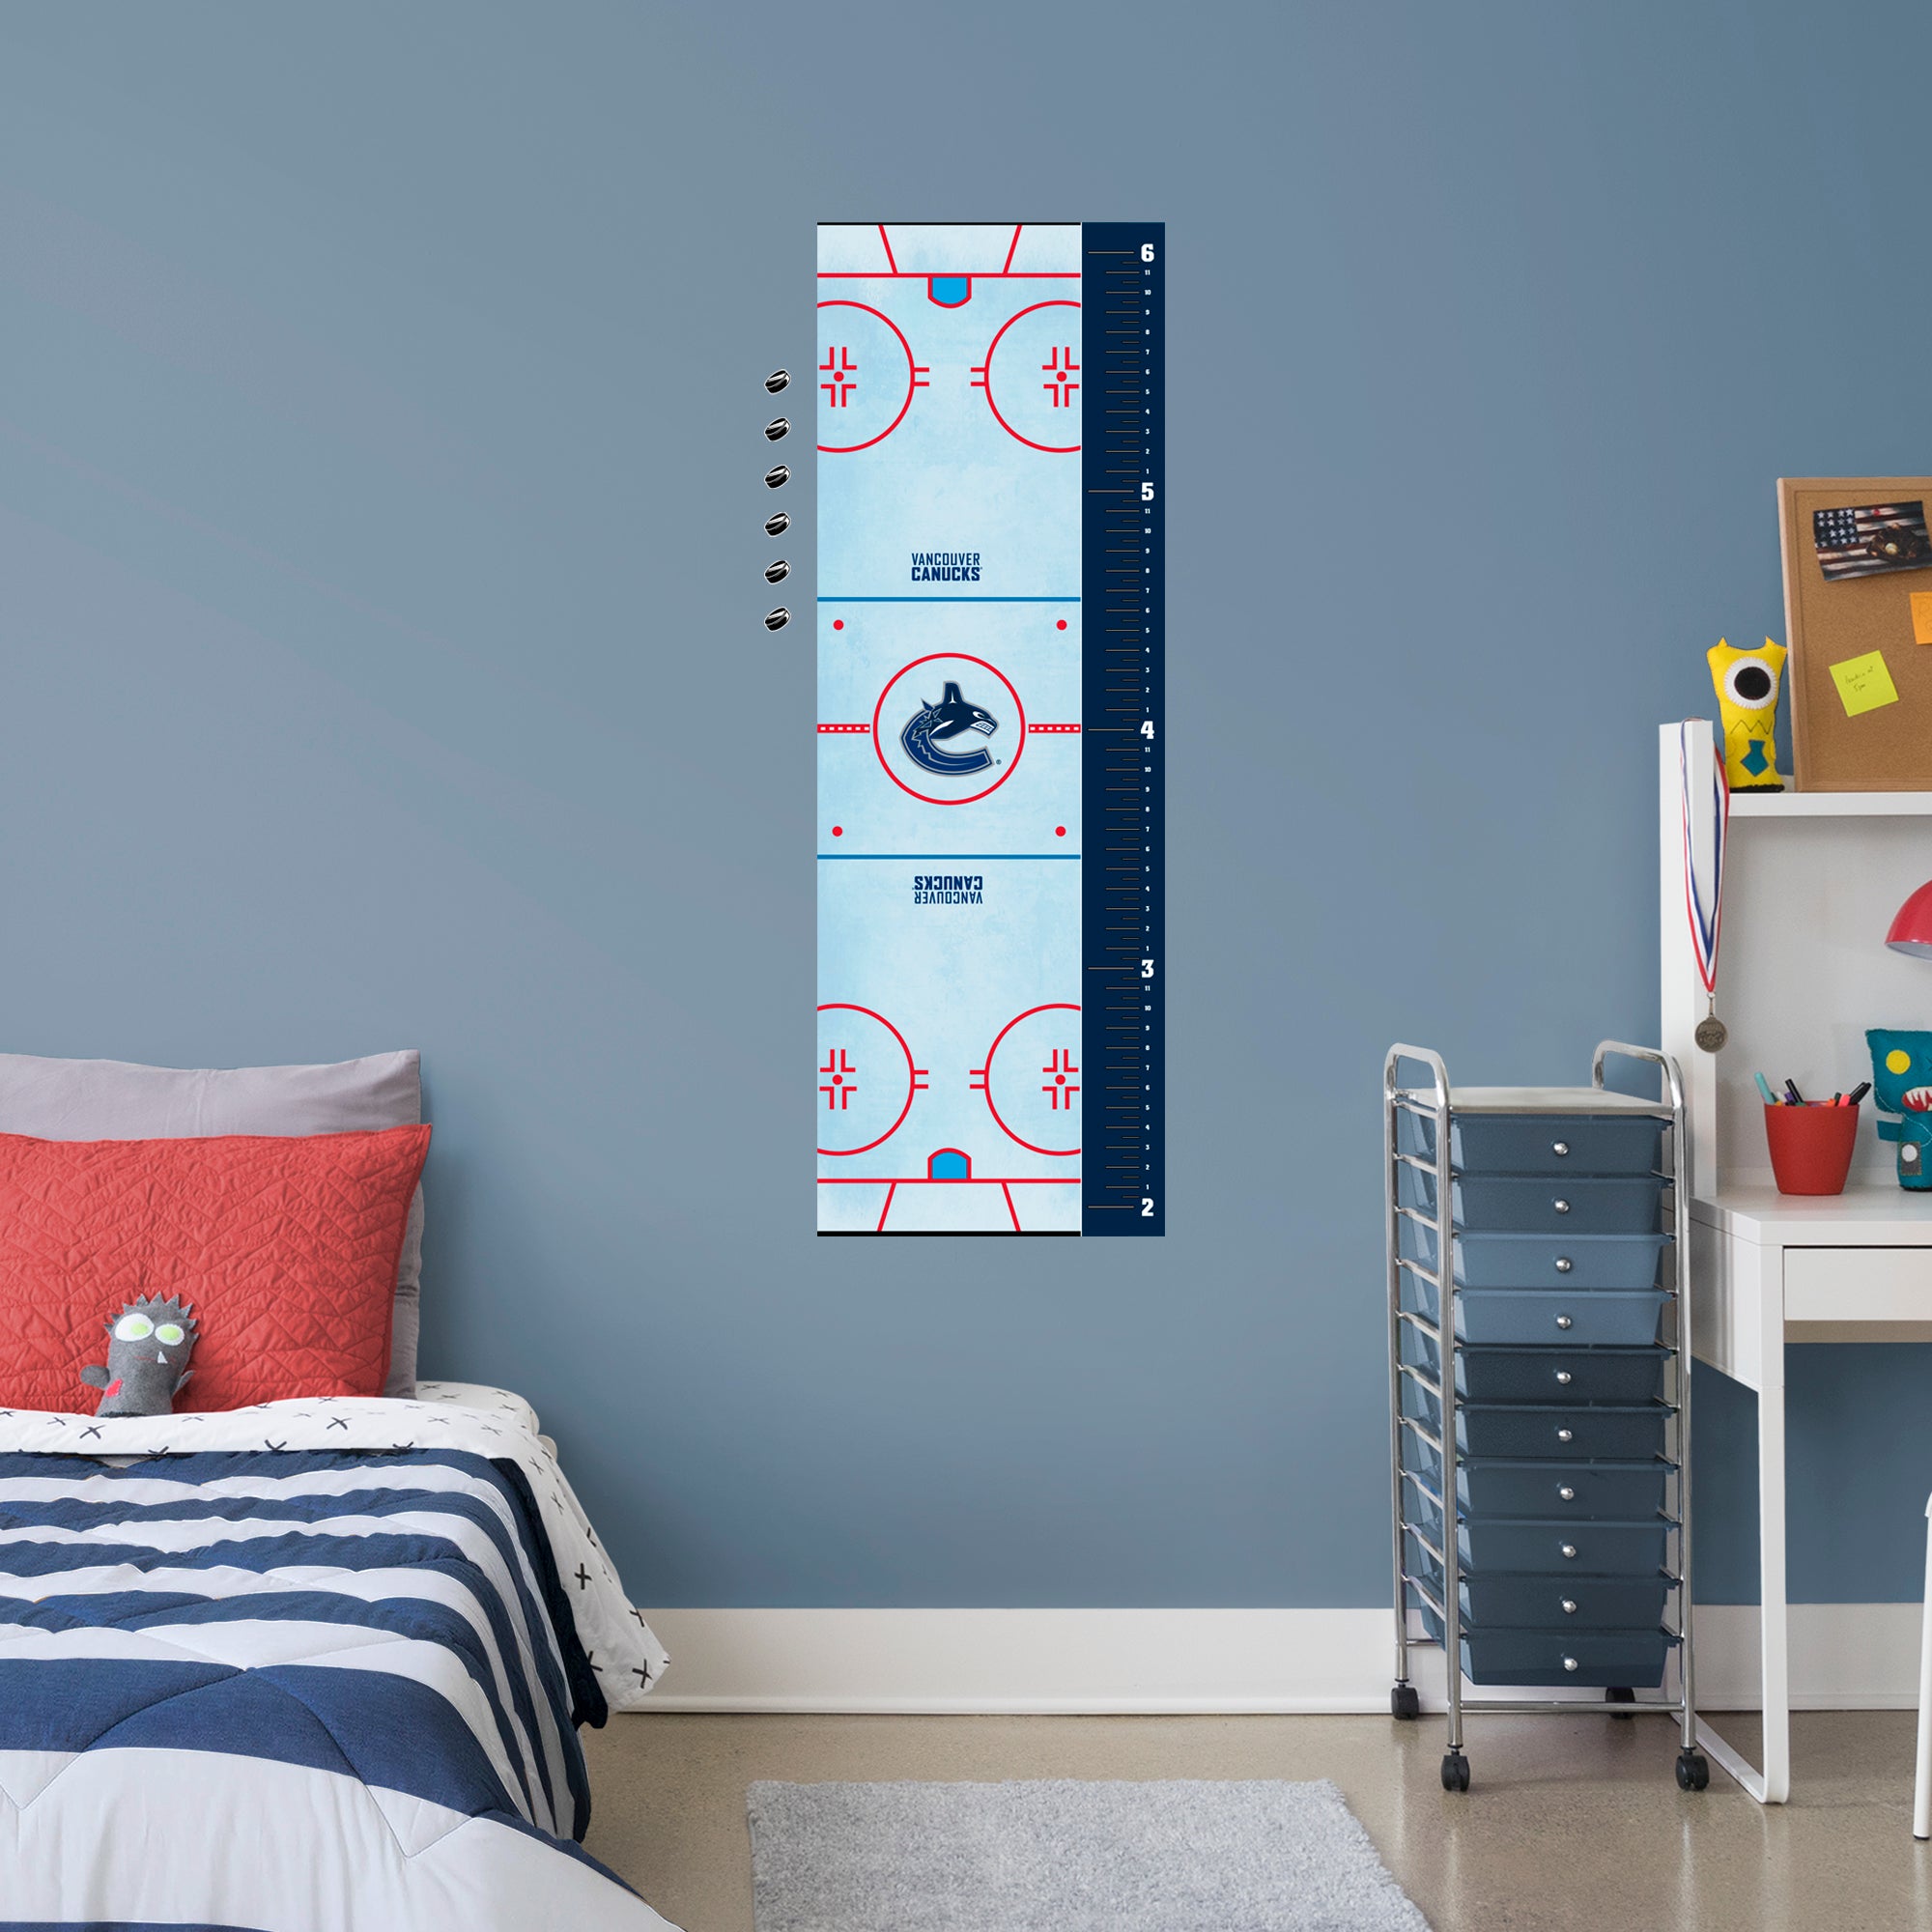 Vancouver Canucks: Rink Growth Chart - Officially Licensed NHL Removable Wall Graphic Large by Fathead | Vinyl